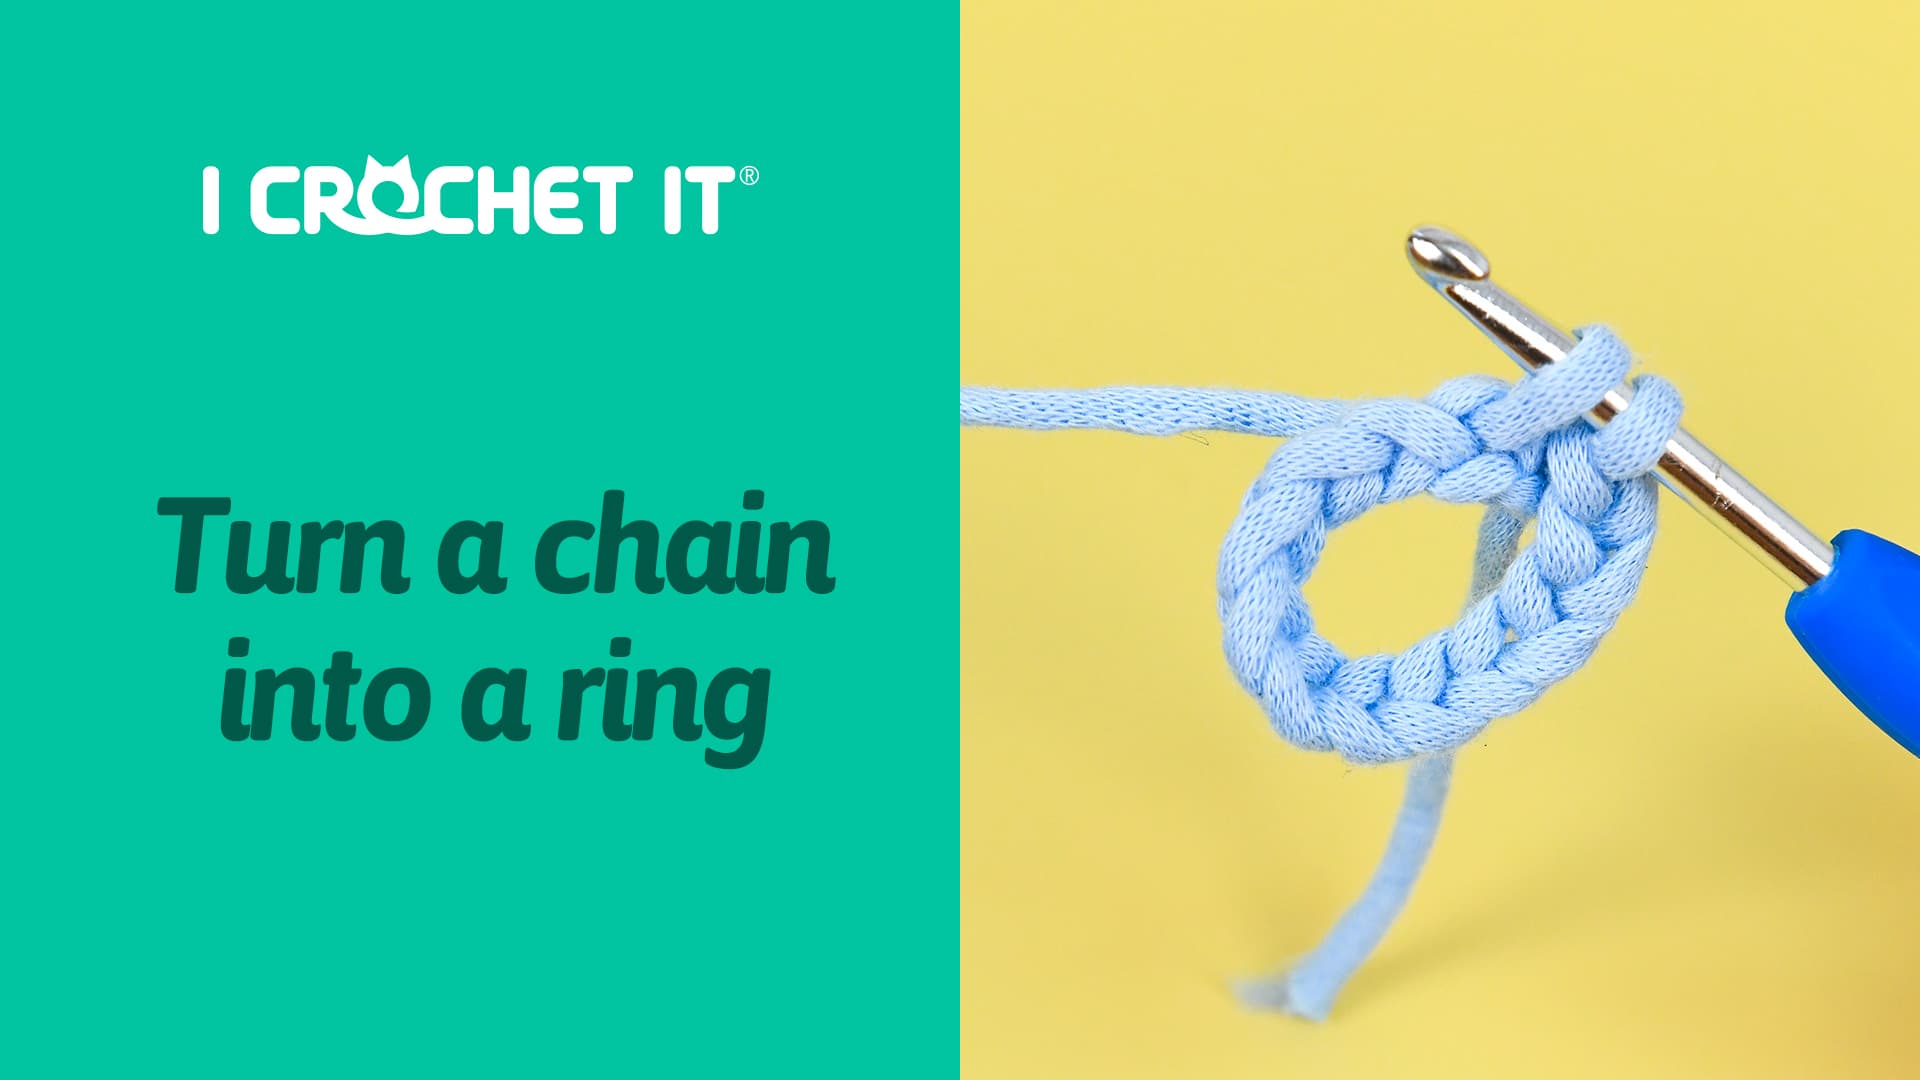 Turn-a-chain-into-a-ring